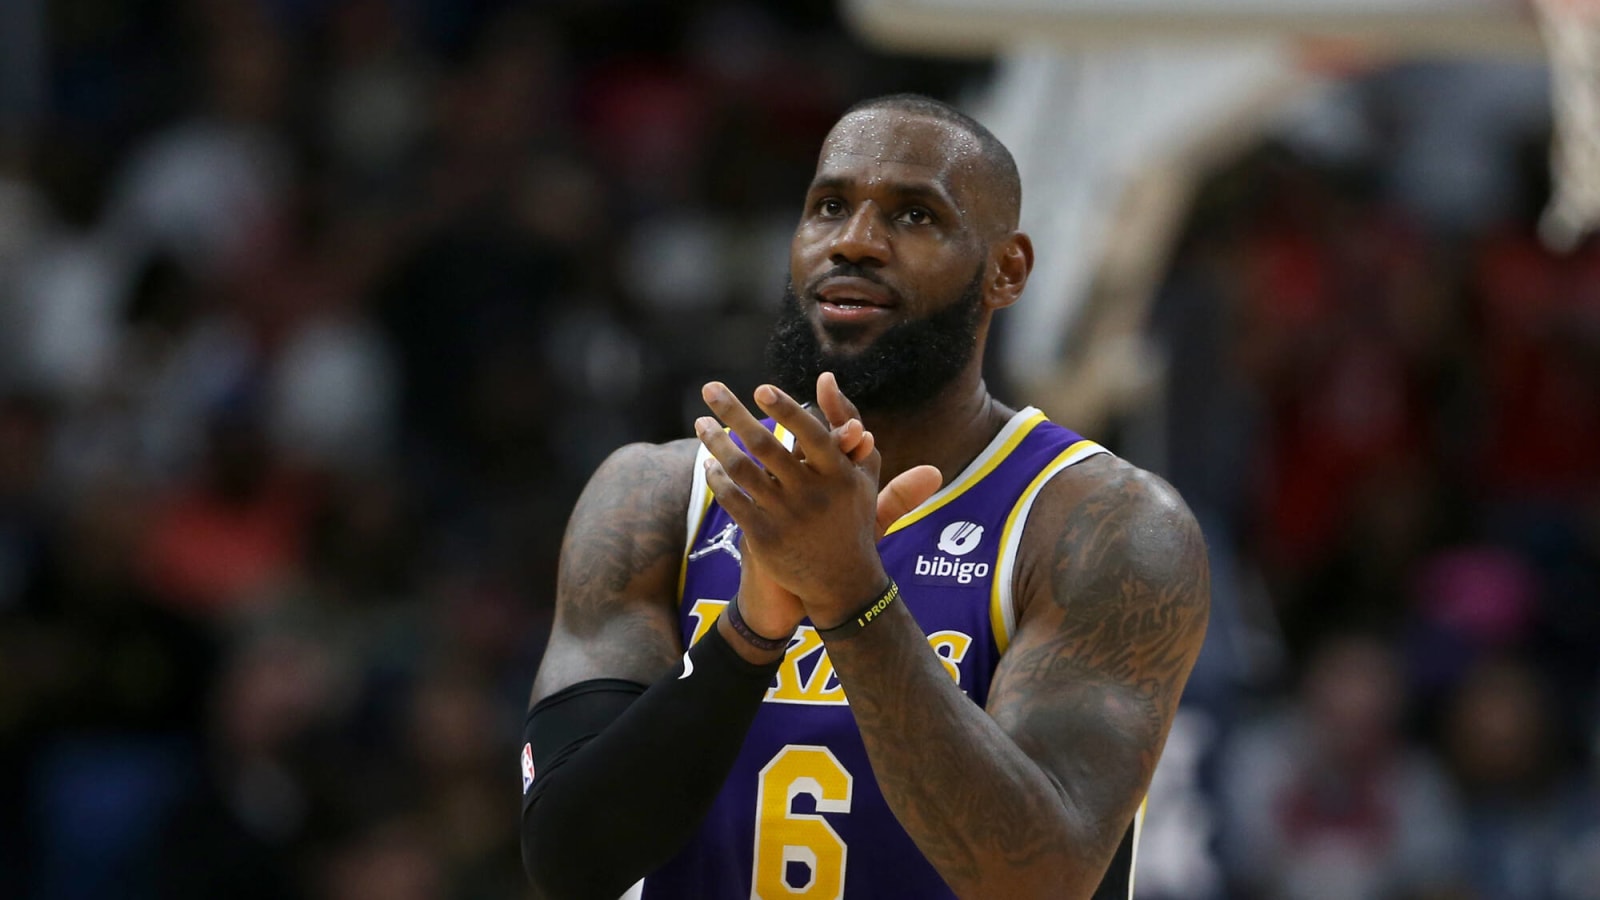 Jeanie Buss Wants LeBron James To Retire As Member Of Lakers